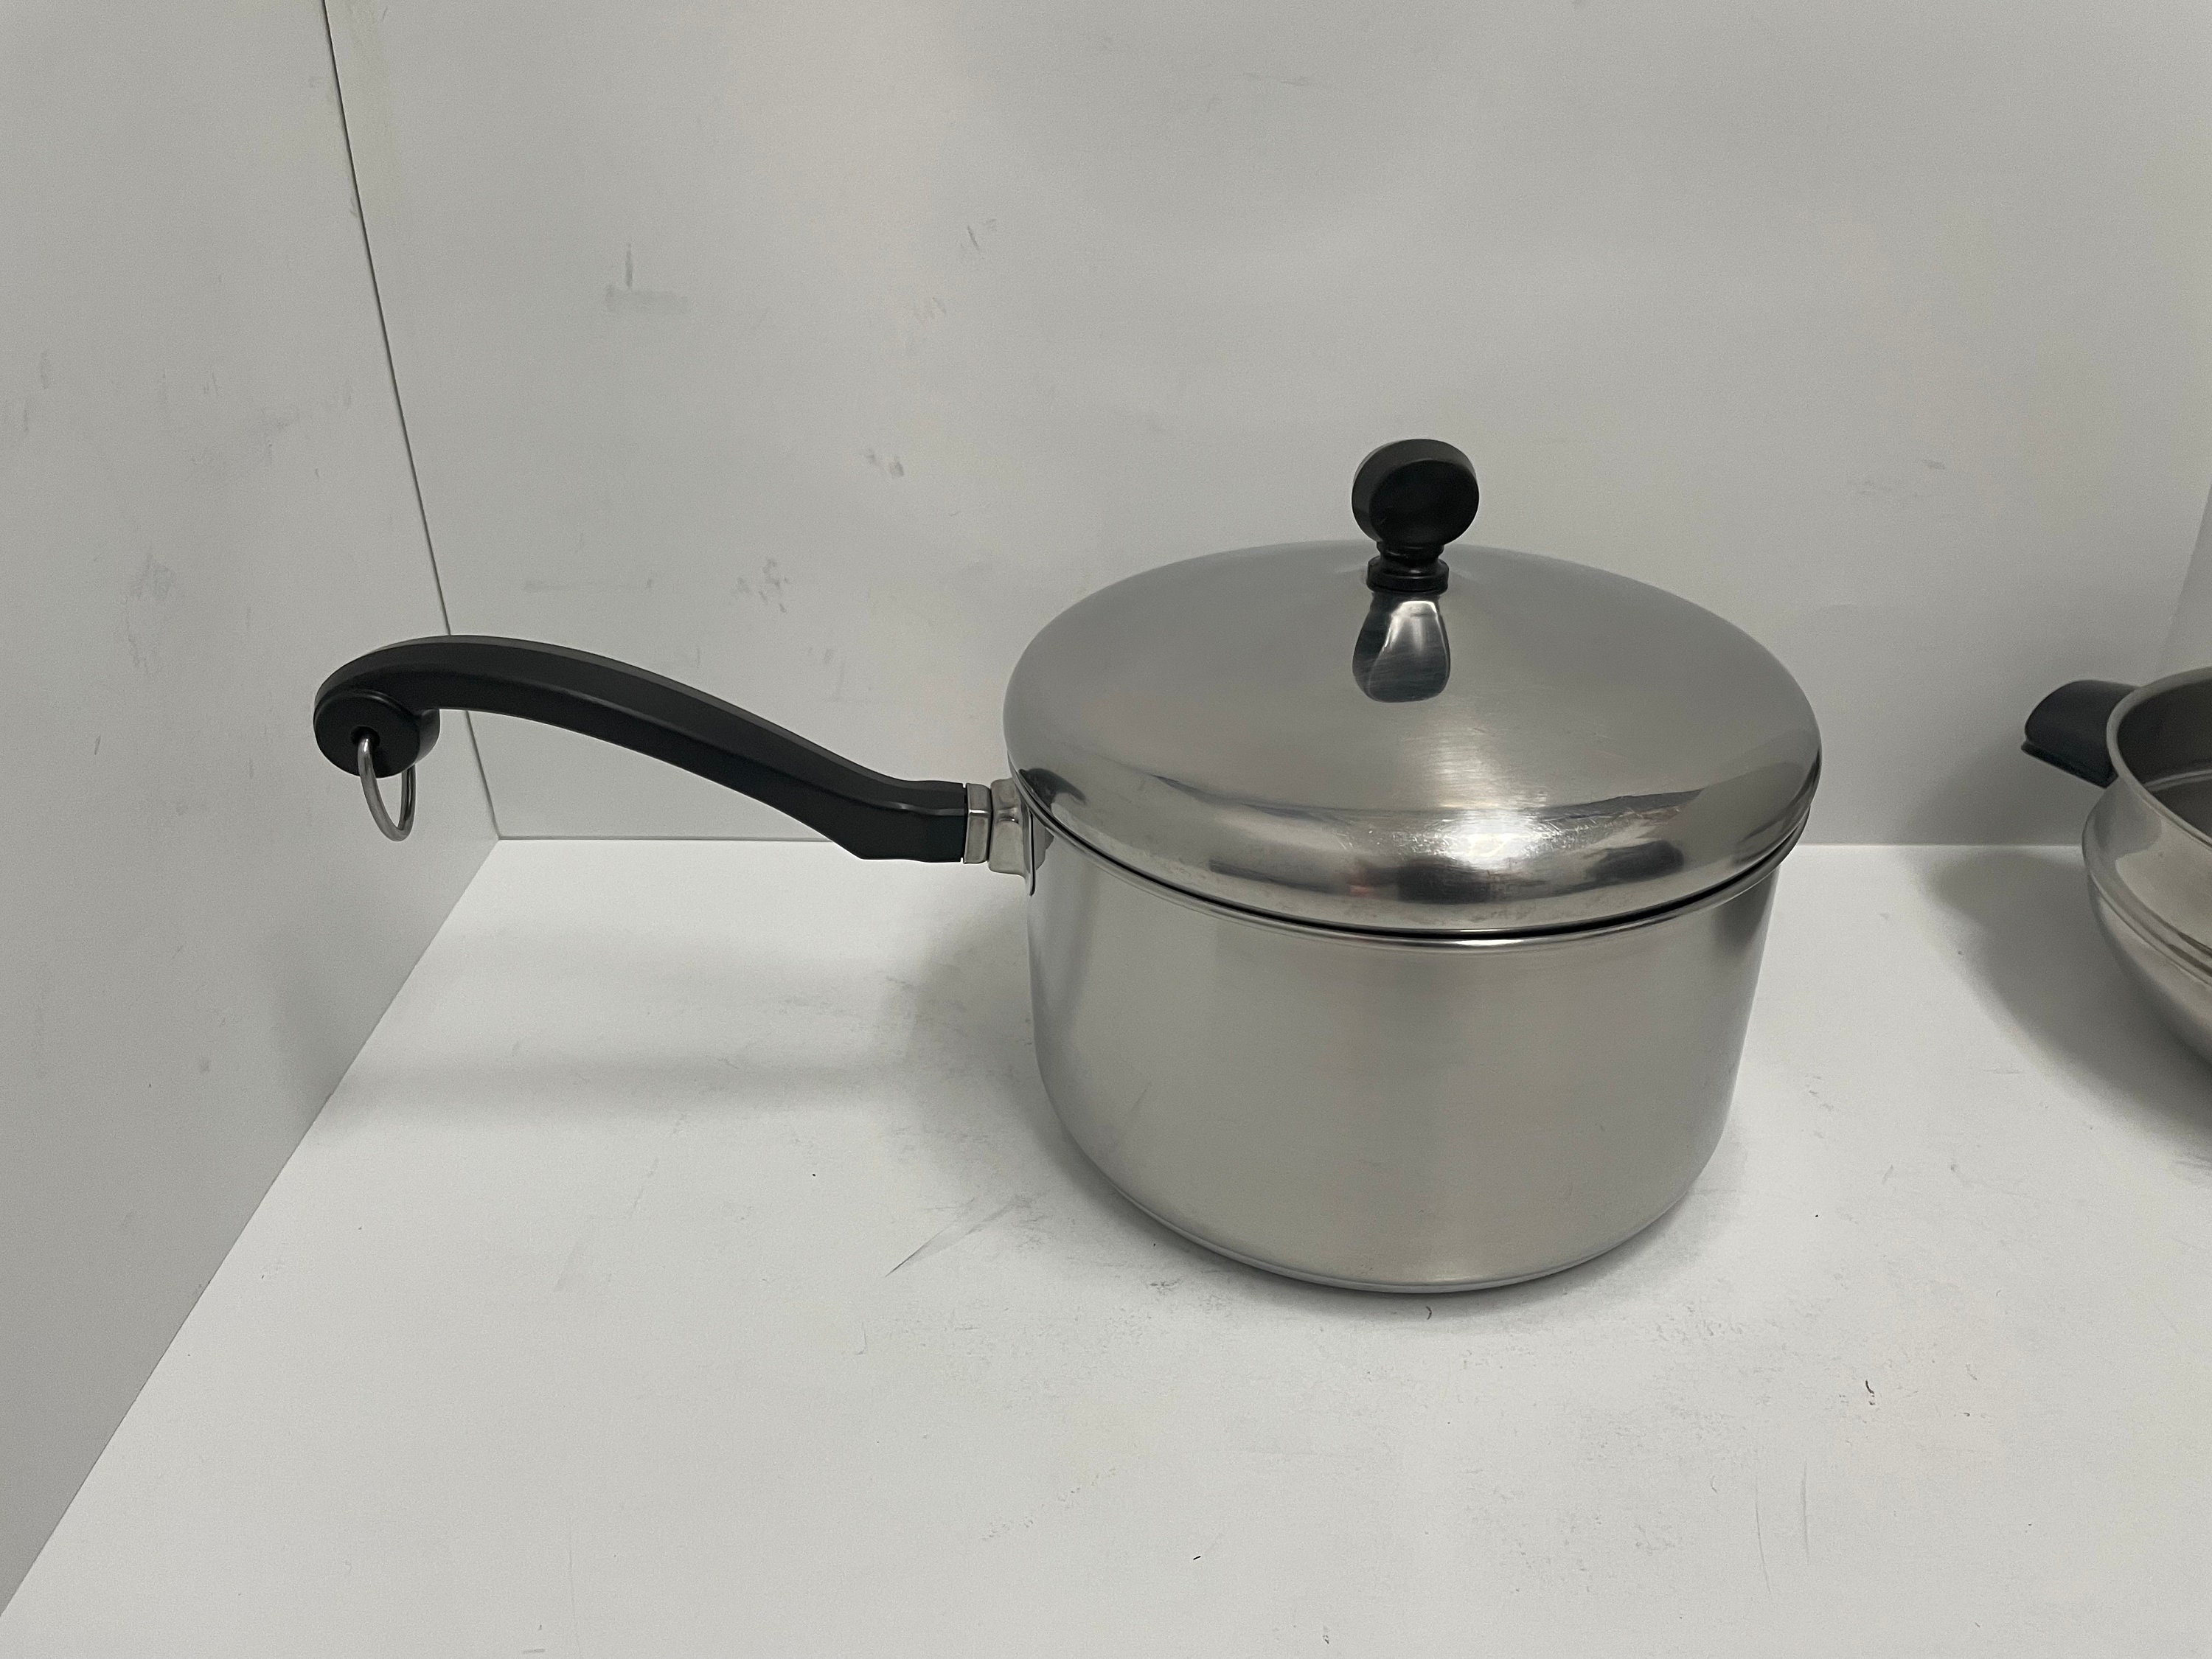 Farberware Aluminum Clad Stainless Steel 2.5qt Double Boiler With Lid